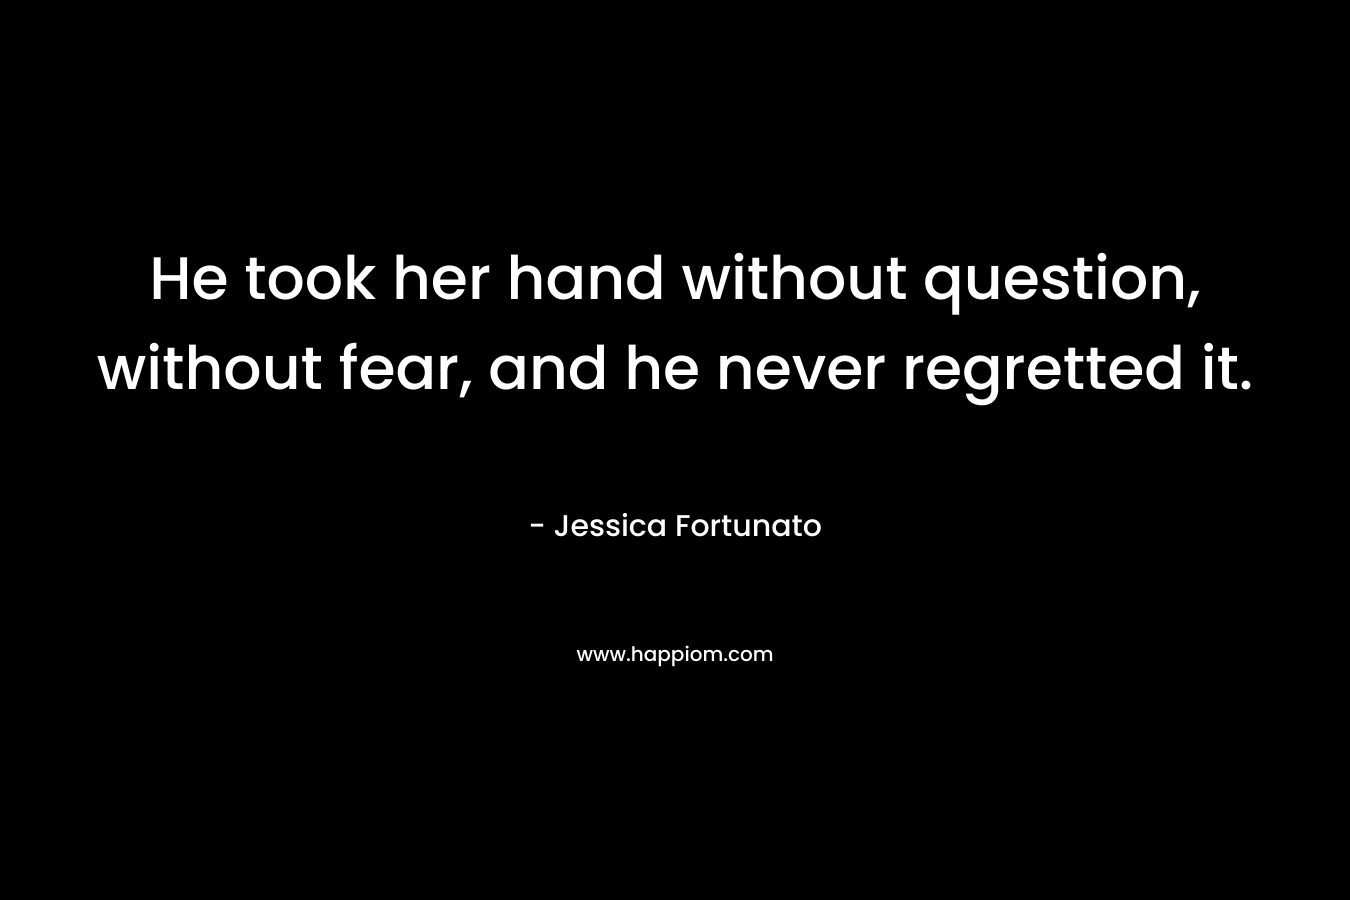 He took her hand without question, without fear, and he never regretted it.